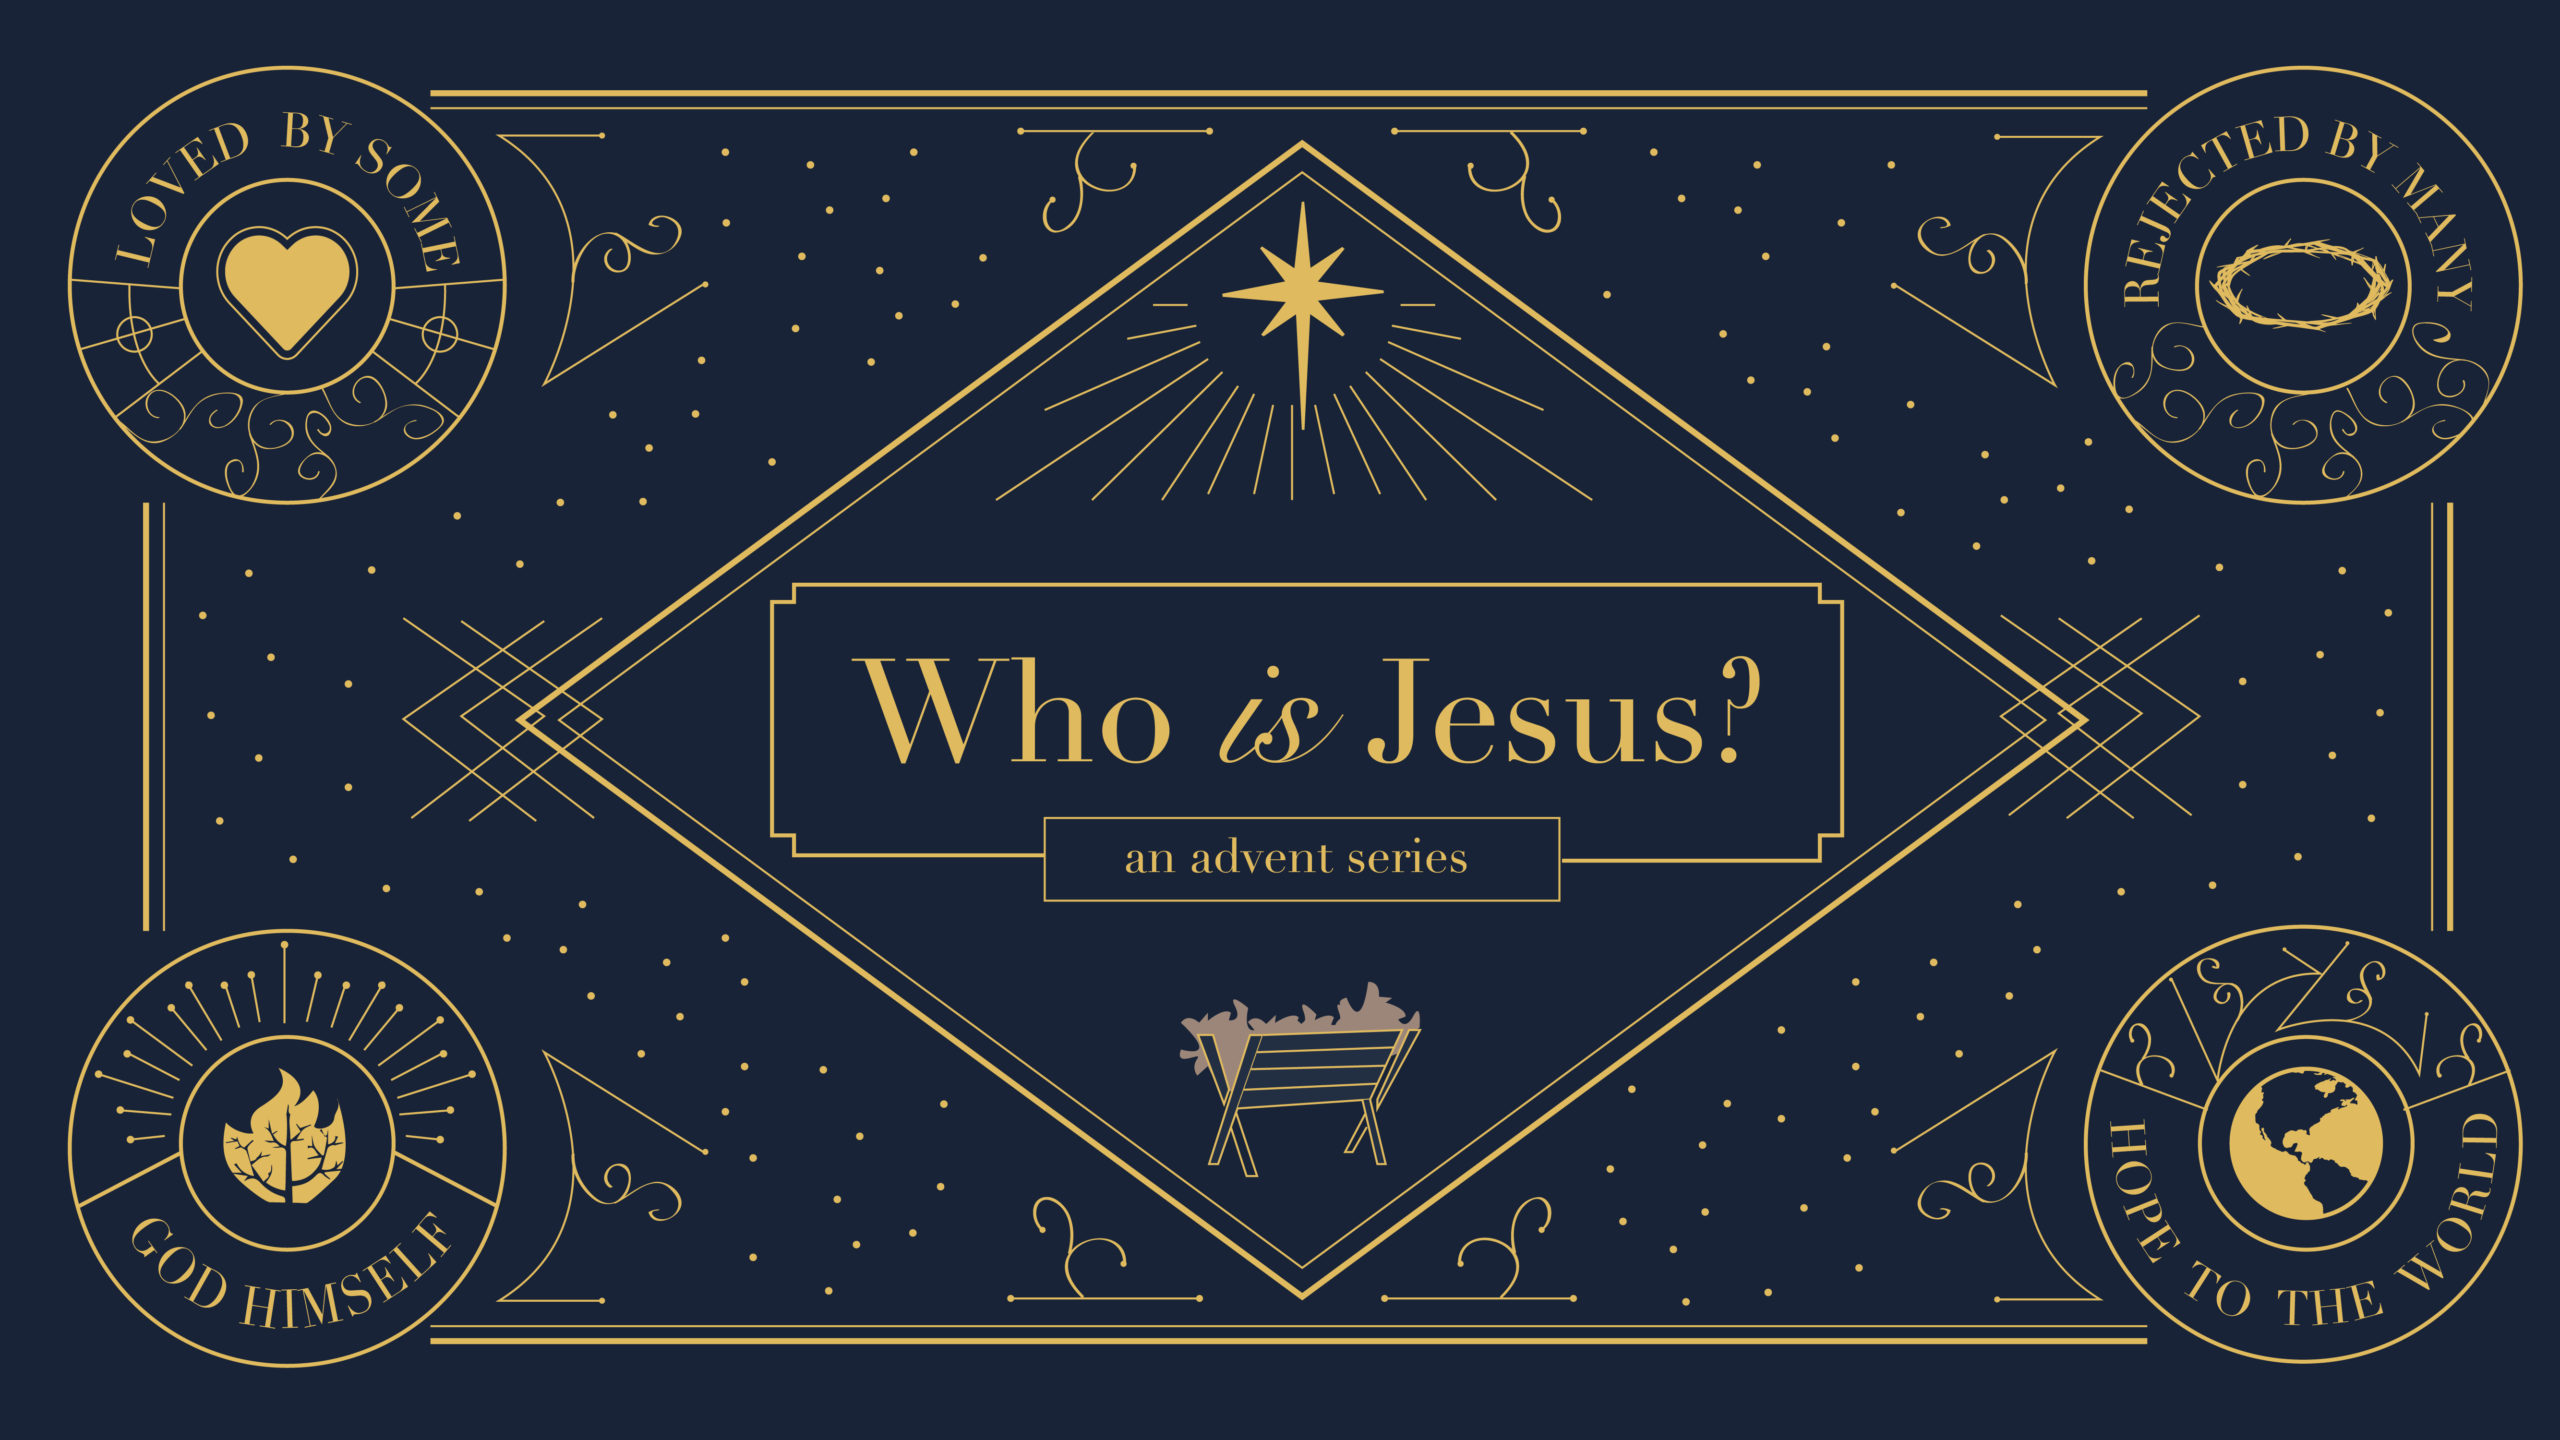 Who is Jesus? Part 4: “He is Hope to the World”